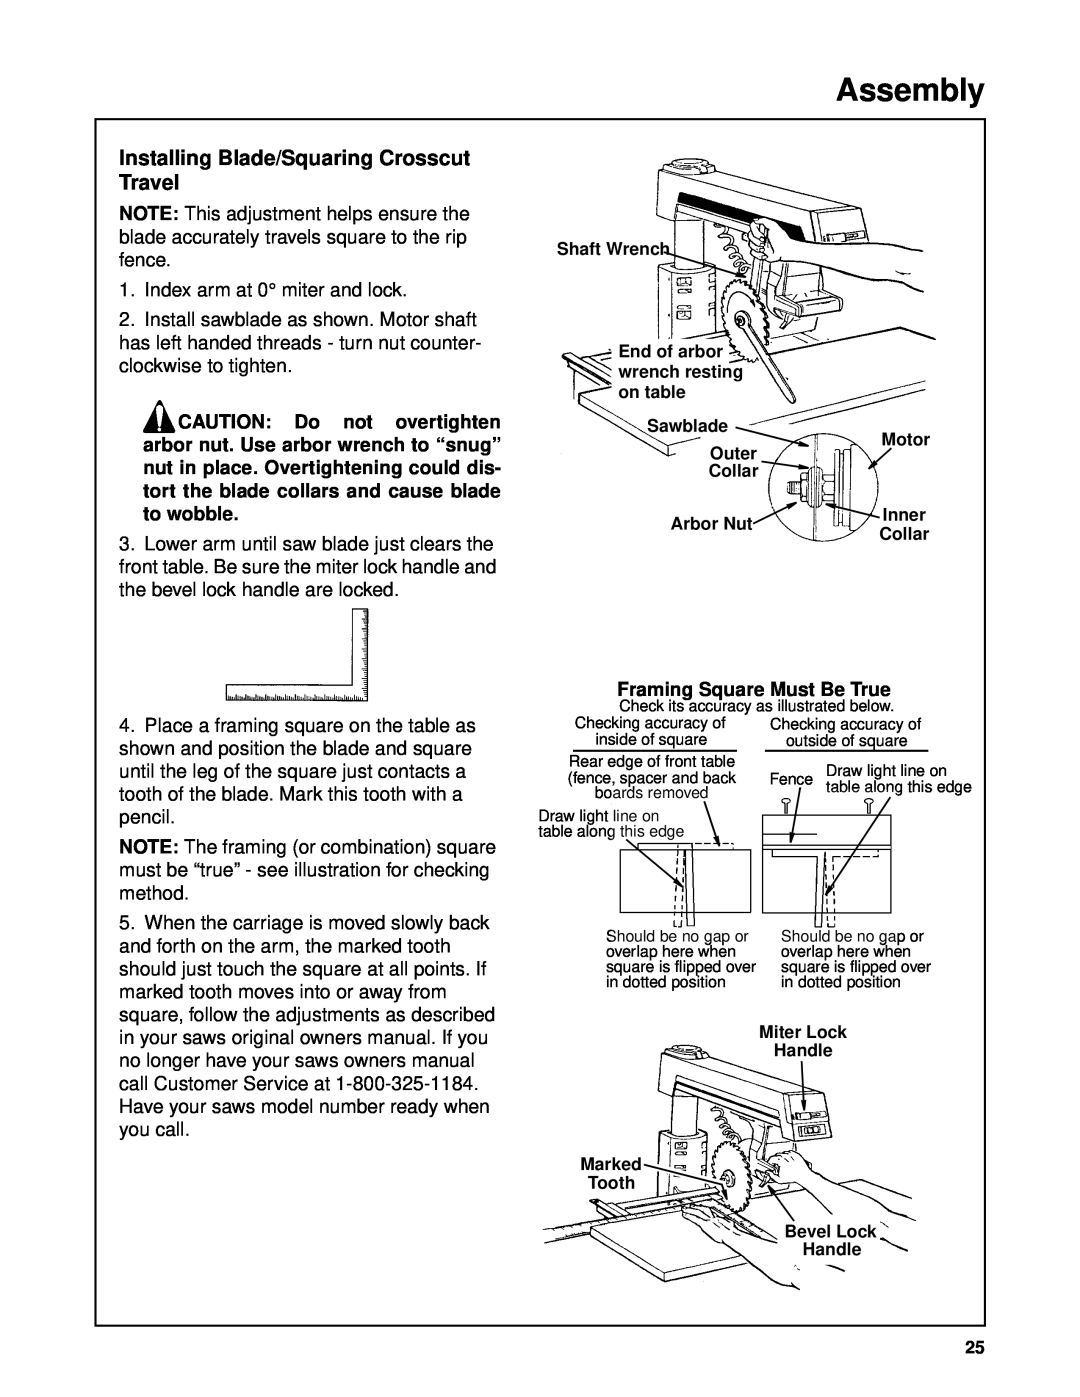 Craftsman 509398, 509399 owner manual Installing Blade/Squaring Crosscut Travel, Assembly, Framing Square Must Be True 